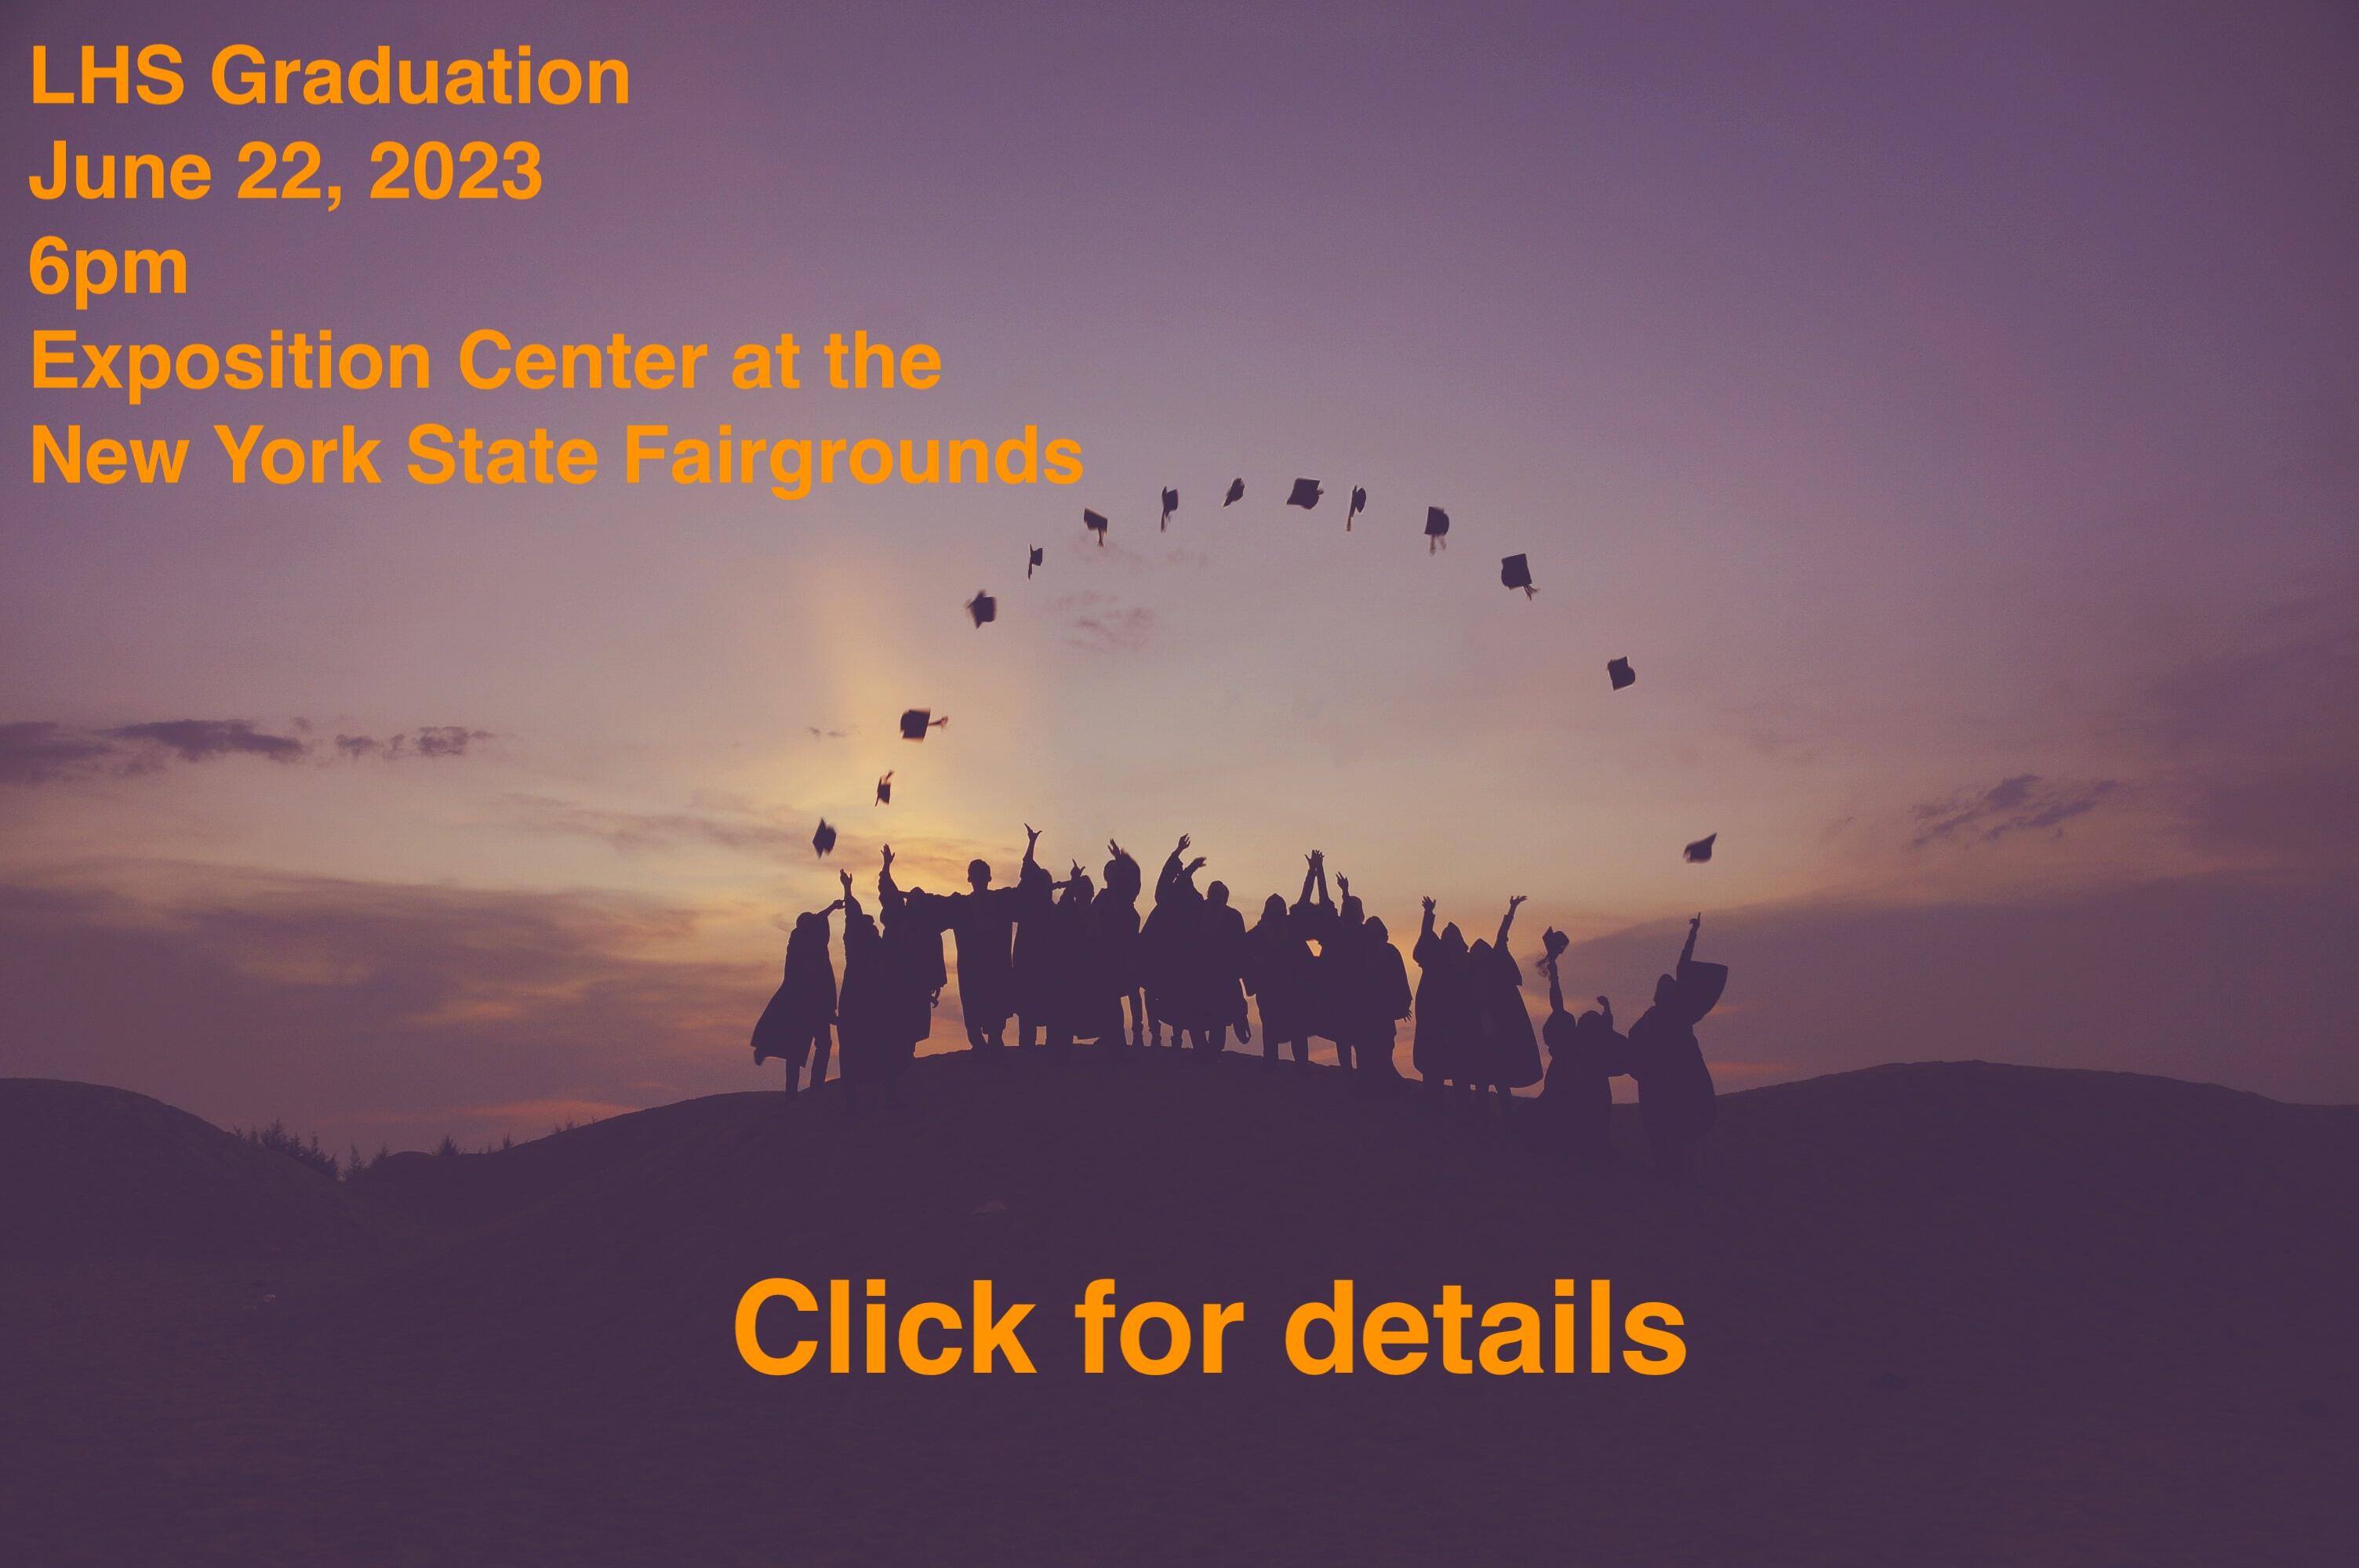 LHS Graduation June 22, 2023 at 6pm at the Exposition Center New York State Fairgrounds